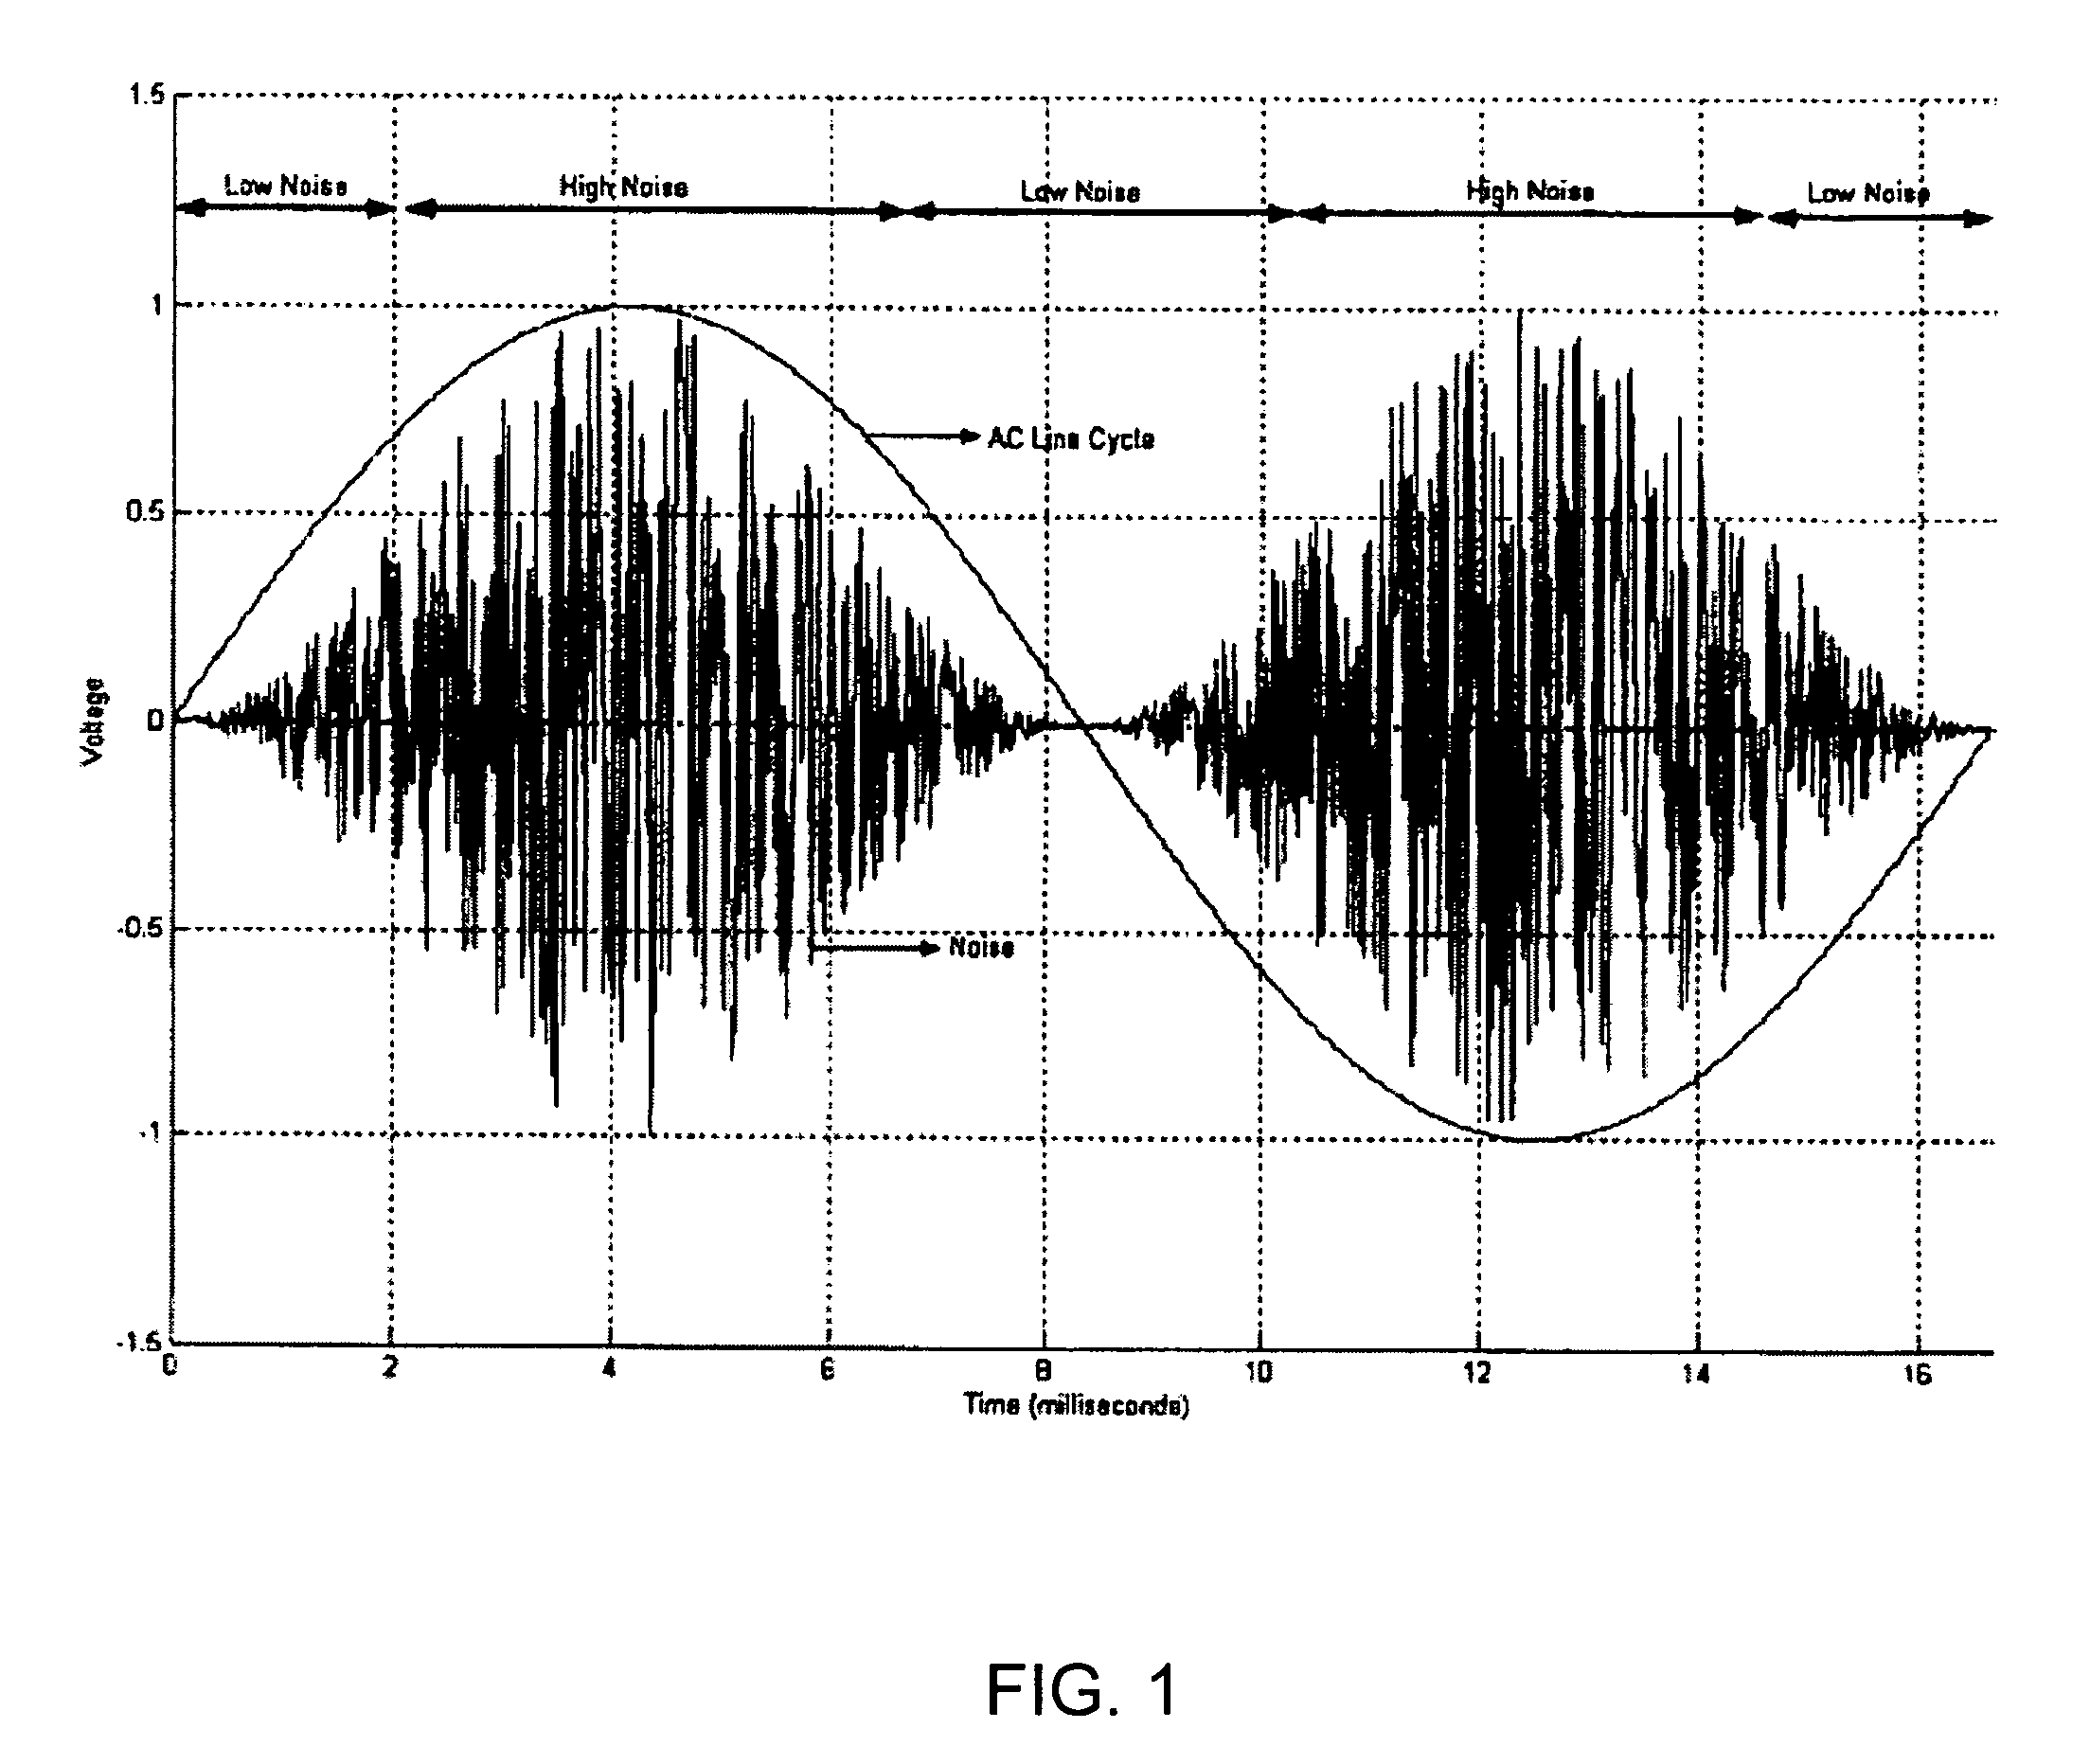 Communicating in a network that includes a medium having varying transmission characteristics